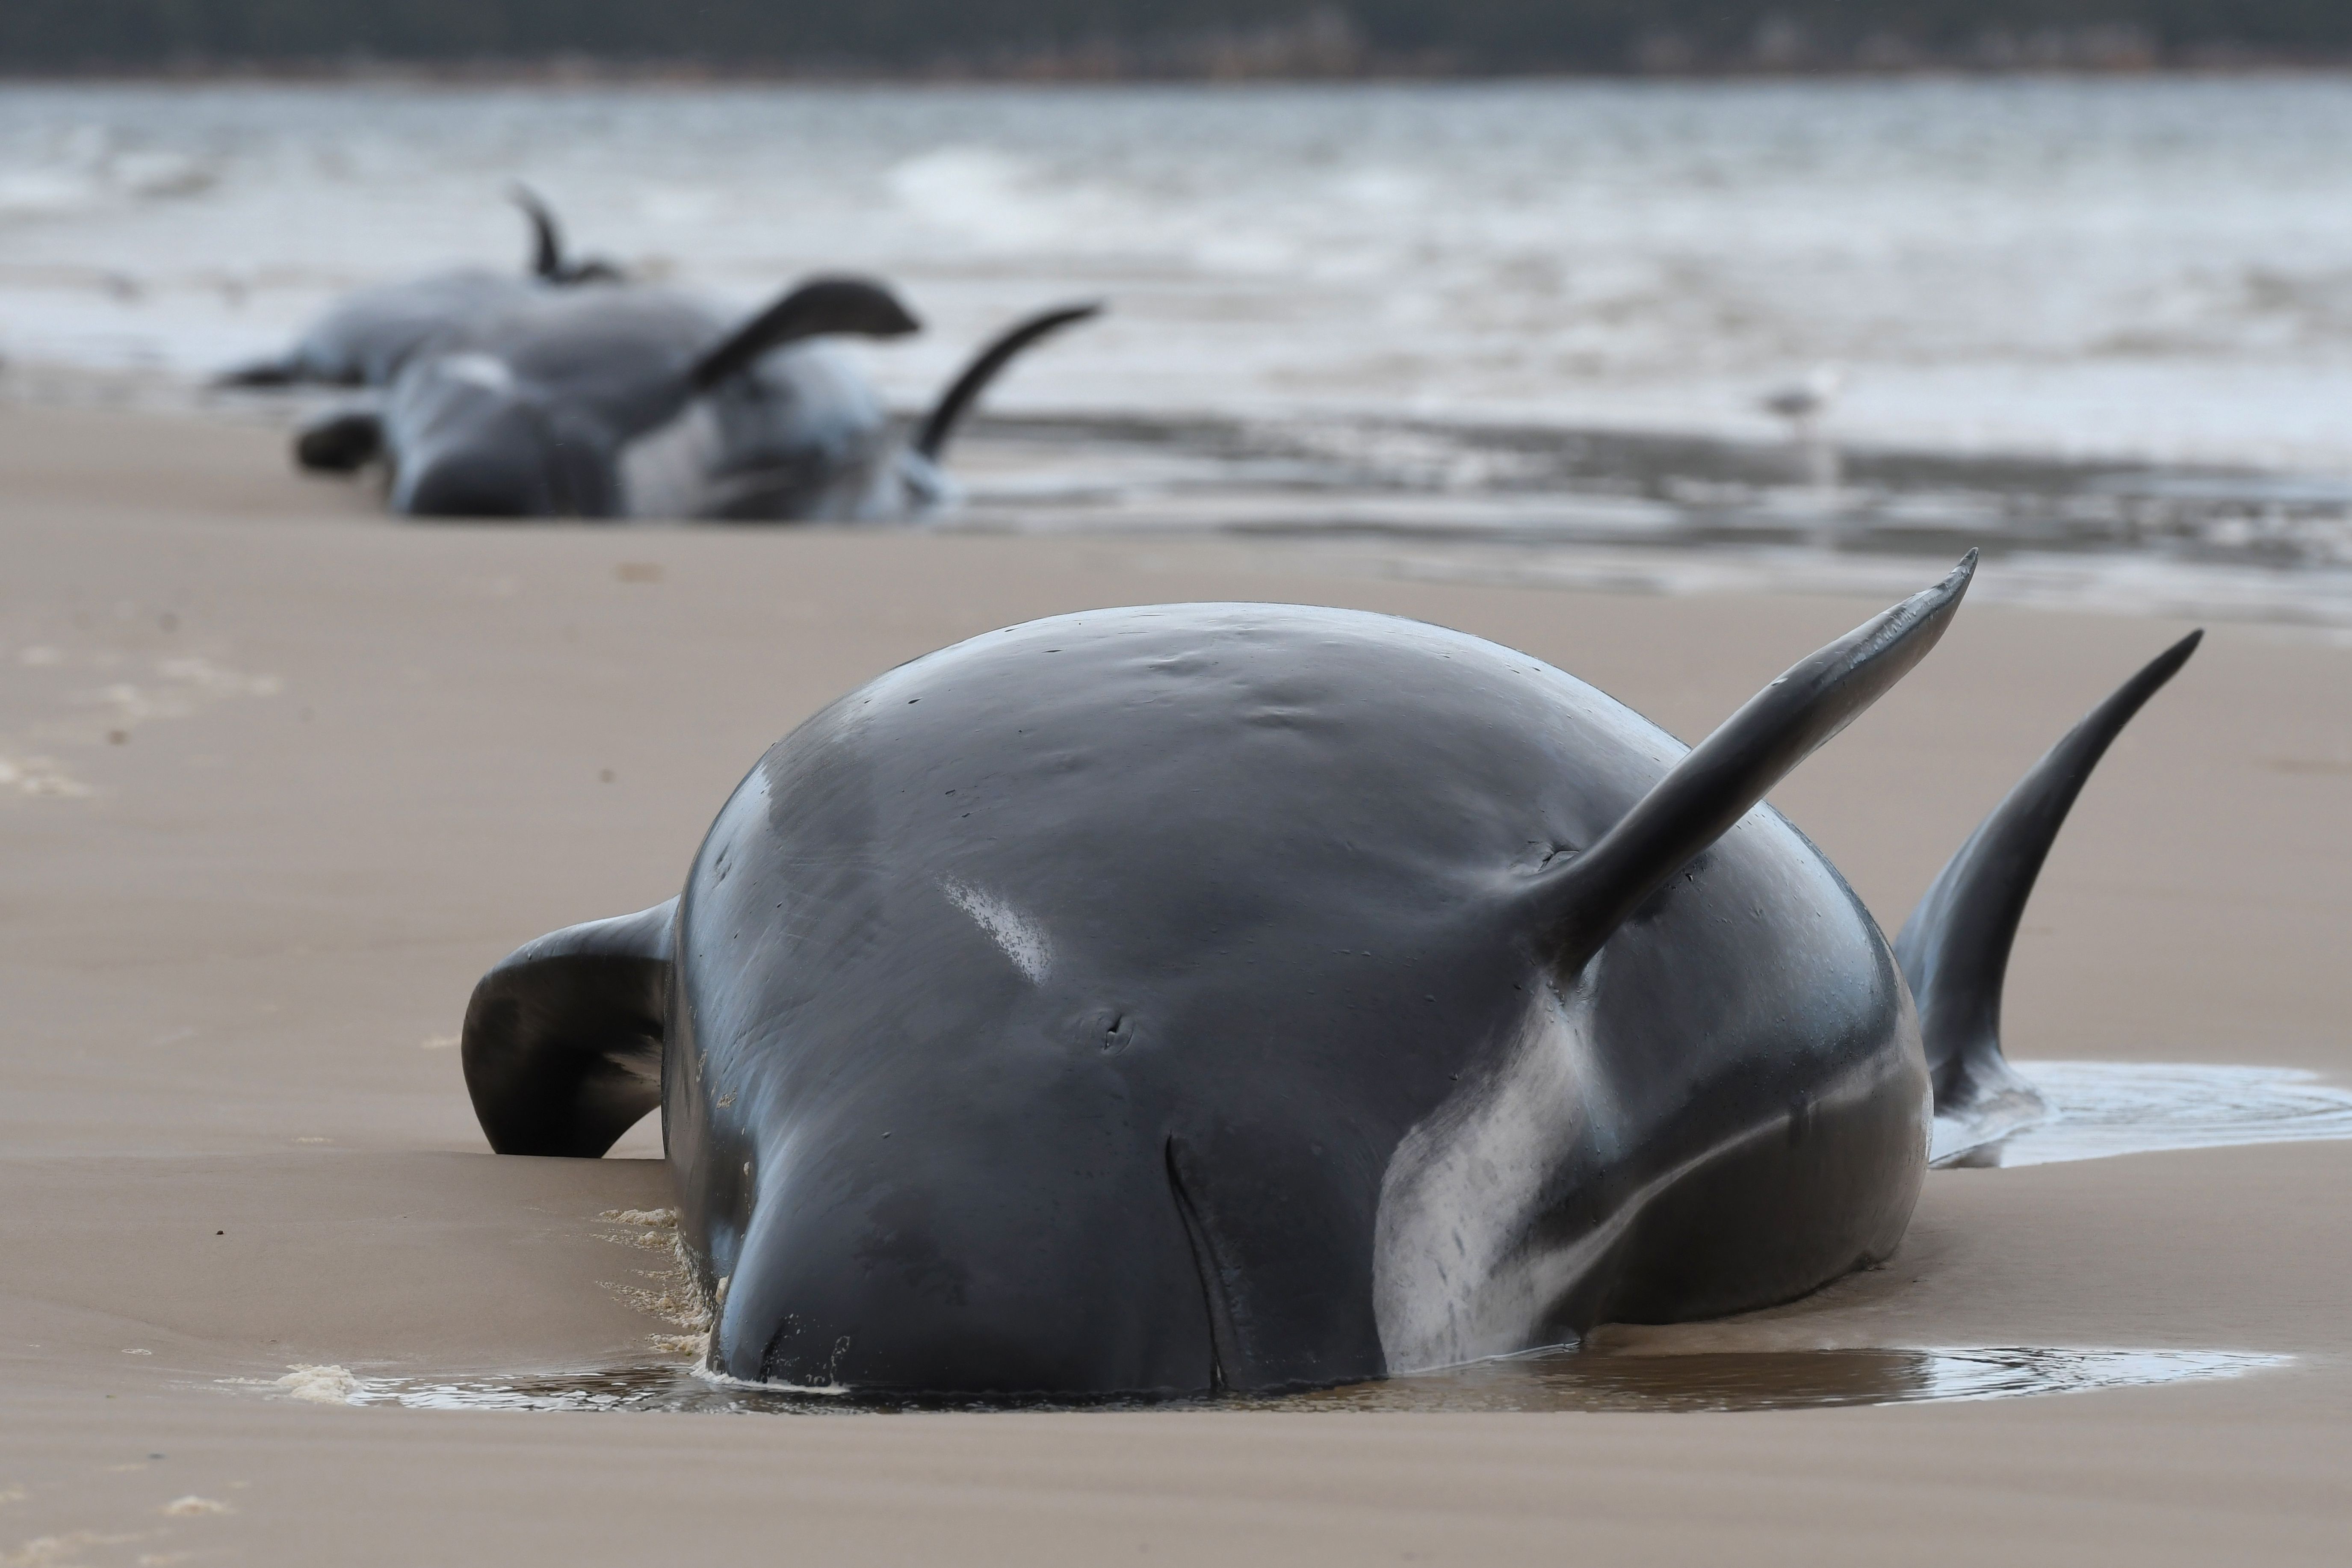 Nearly 400 whales dead in Australia's worst mass stranding | The Independent